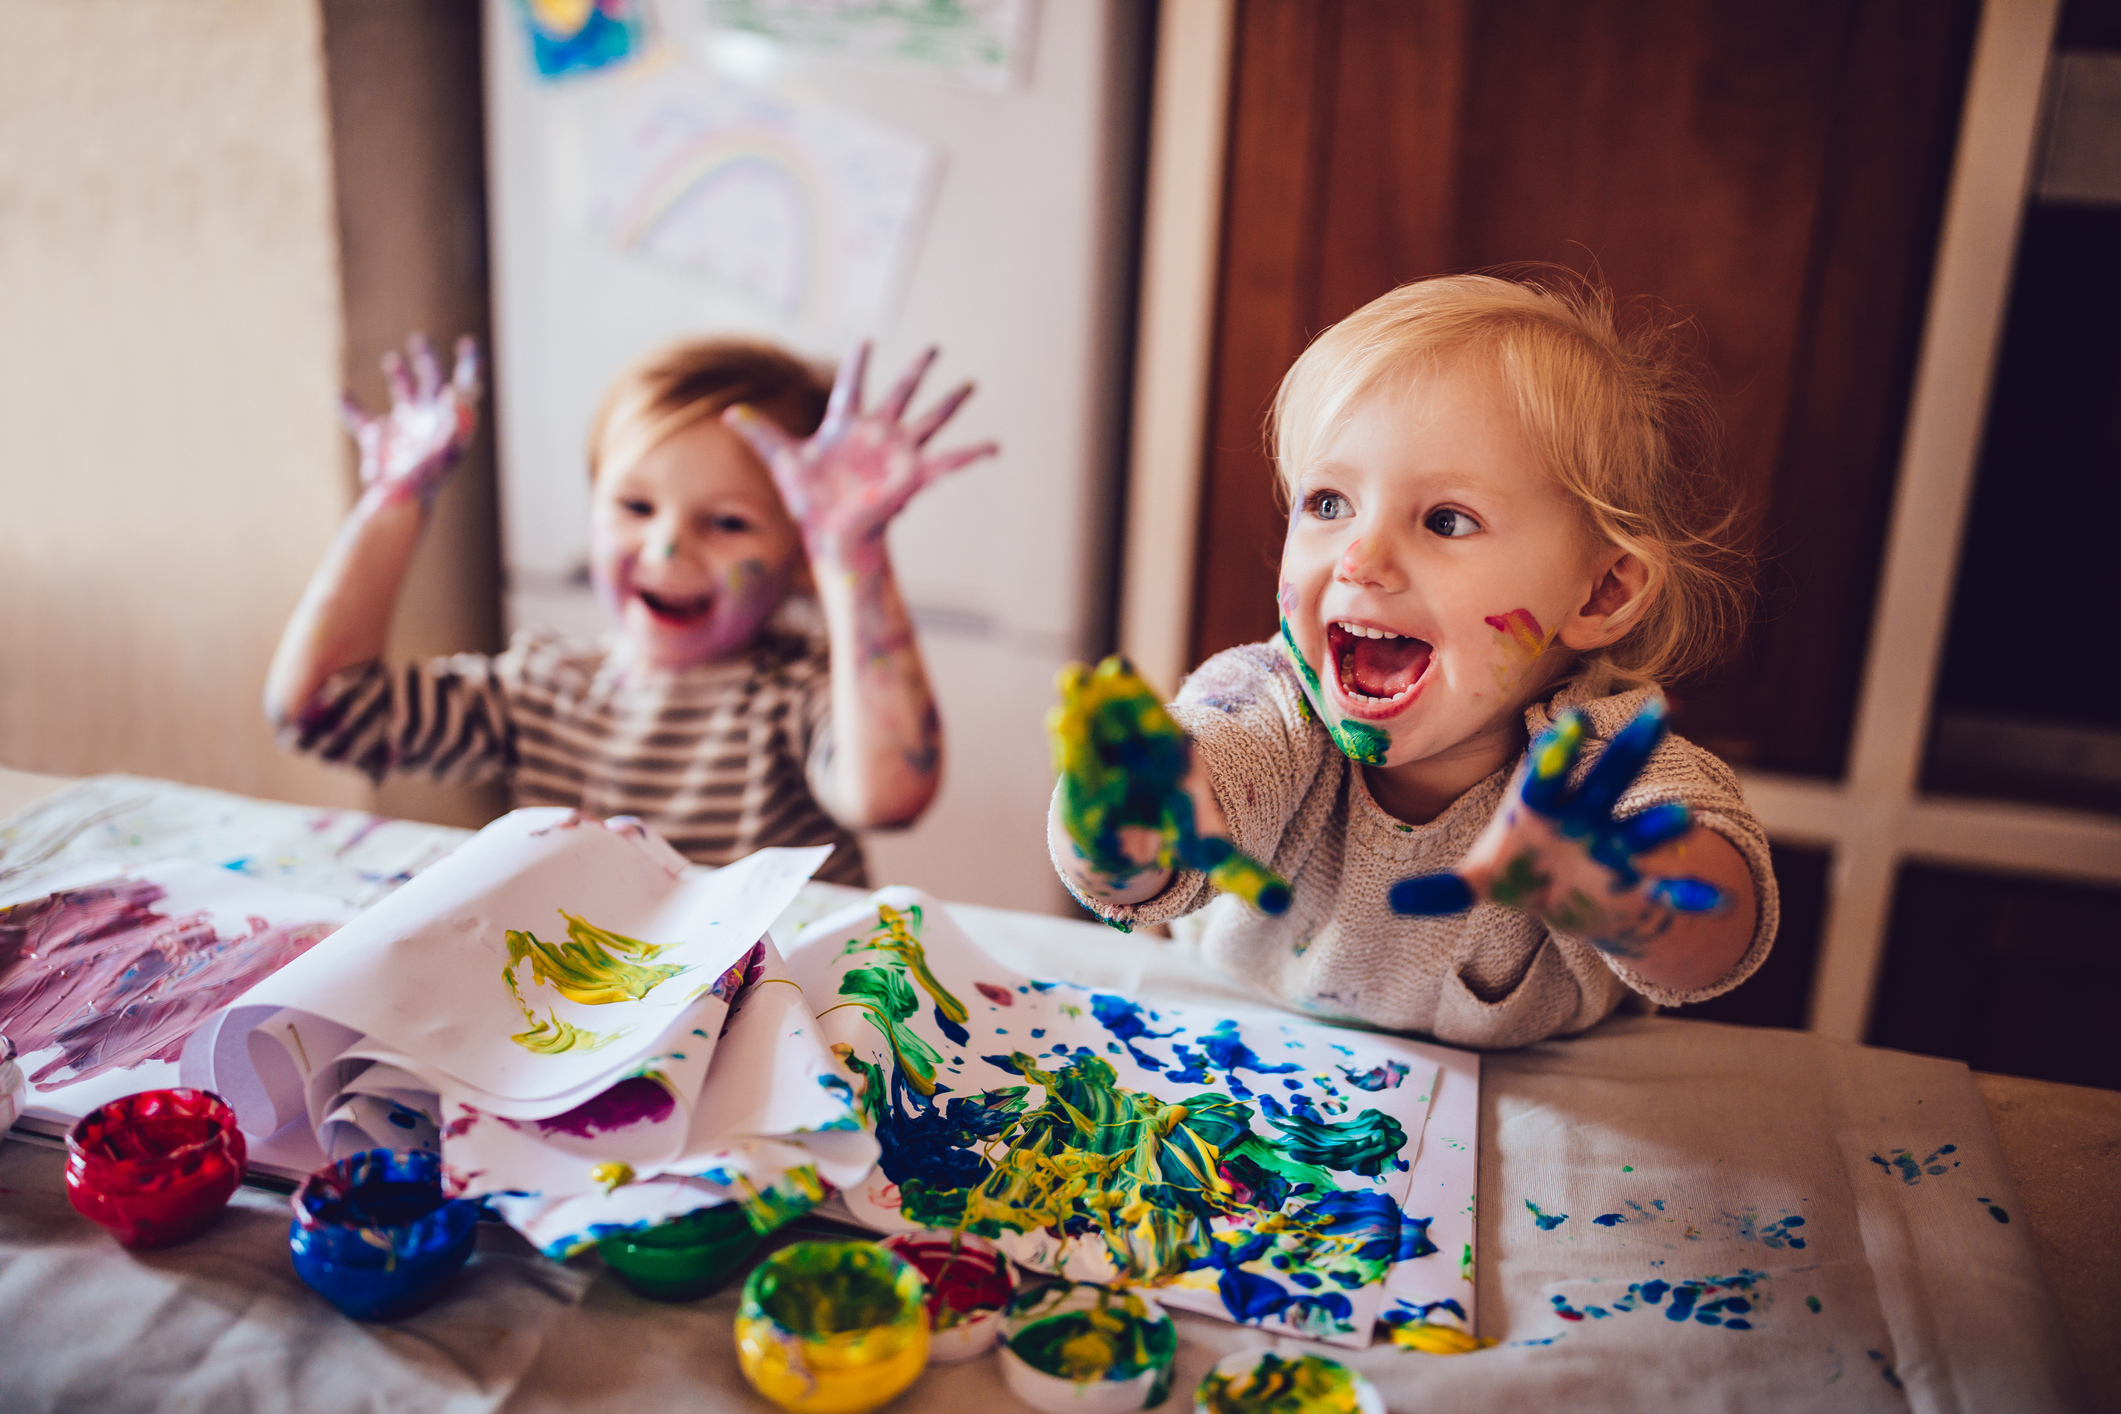 From Making a Mess to Making a Mark: How Children Develop Writing Skills